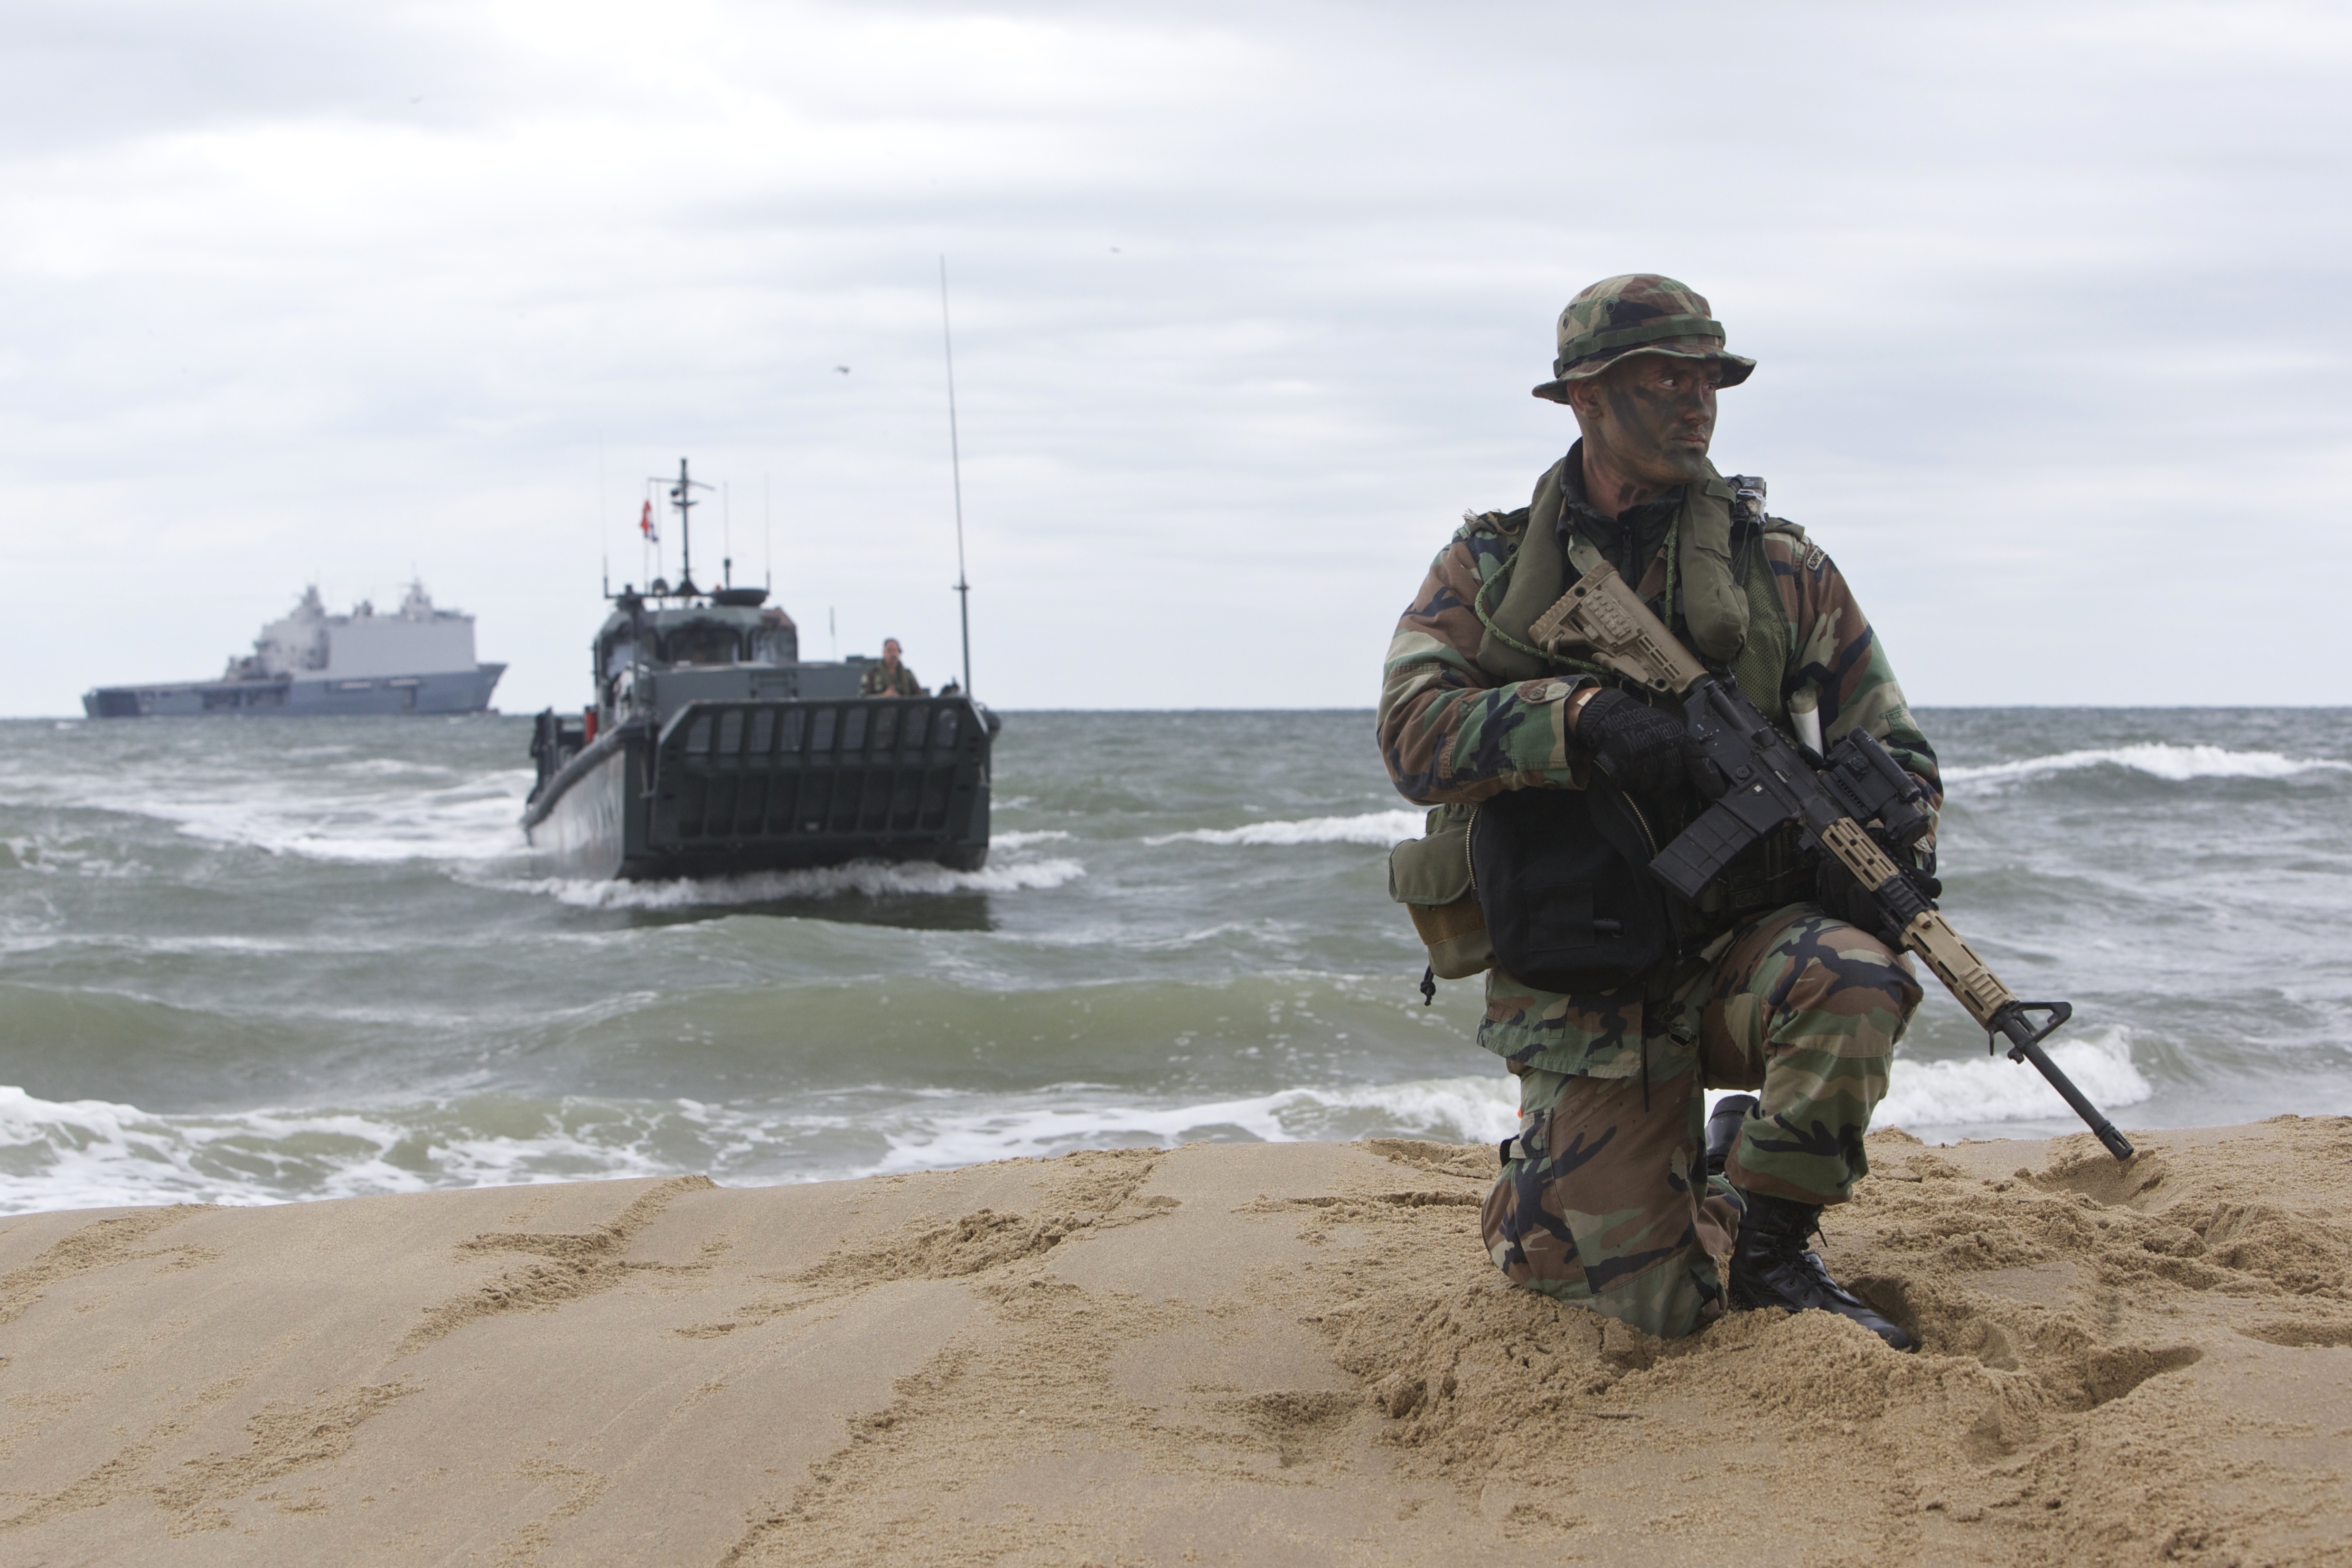 A Dutch marine from the Royal Netherlands Marine Corps is securing the area of Utah Beach during Bold Alligator 14. Dutch amphibious ship HNLMS Johan de Witt (L-801), in the background, served as the command and control headquarters during the exercise to improve interoperability between Dutch, American and other partners' militaries. US Navy photo courtesy of the Royal Netherlands Air Force.